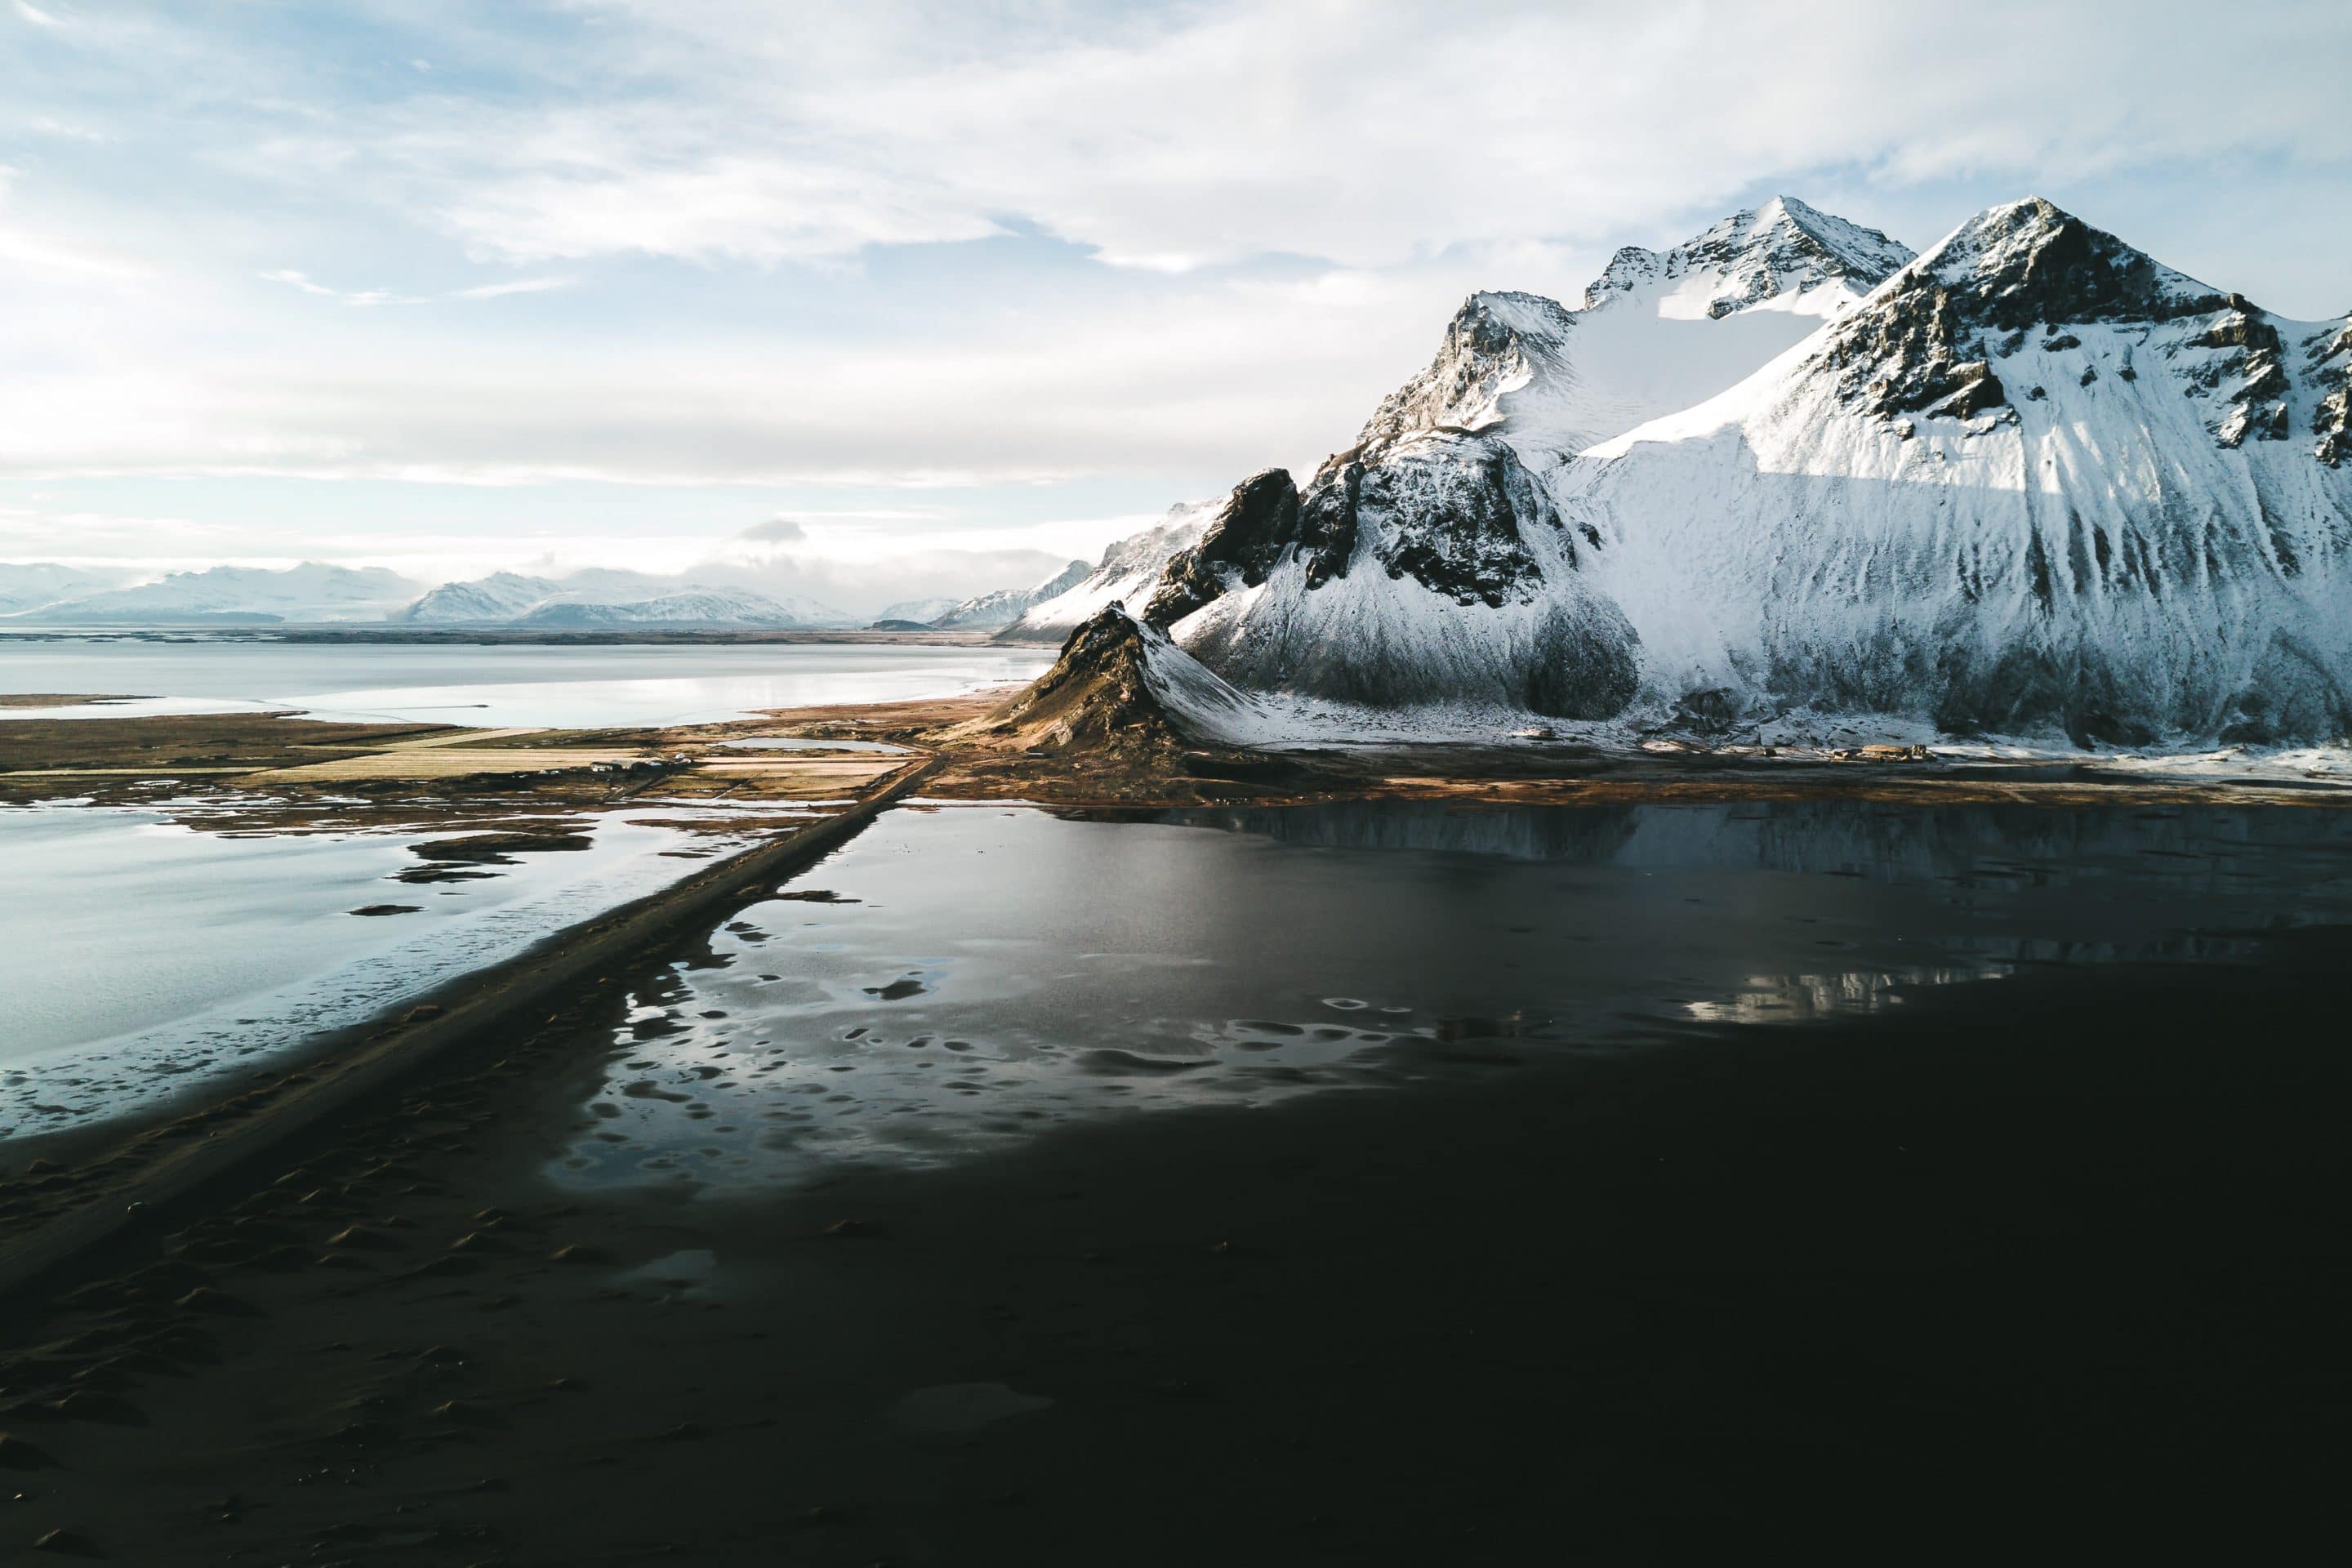 The Stokksnes peninsula in Iceland during a sunset dipping the mountain and beach landscape in moody light by photographer Michael Schauer